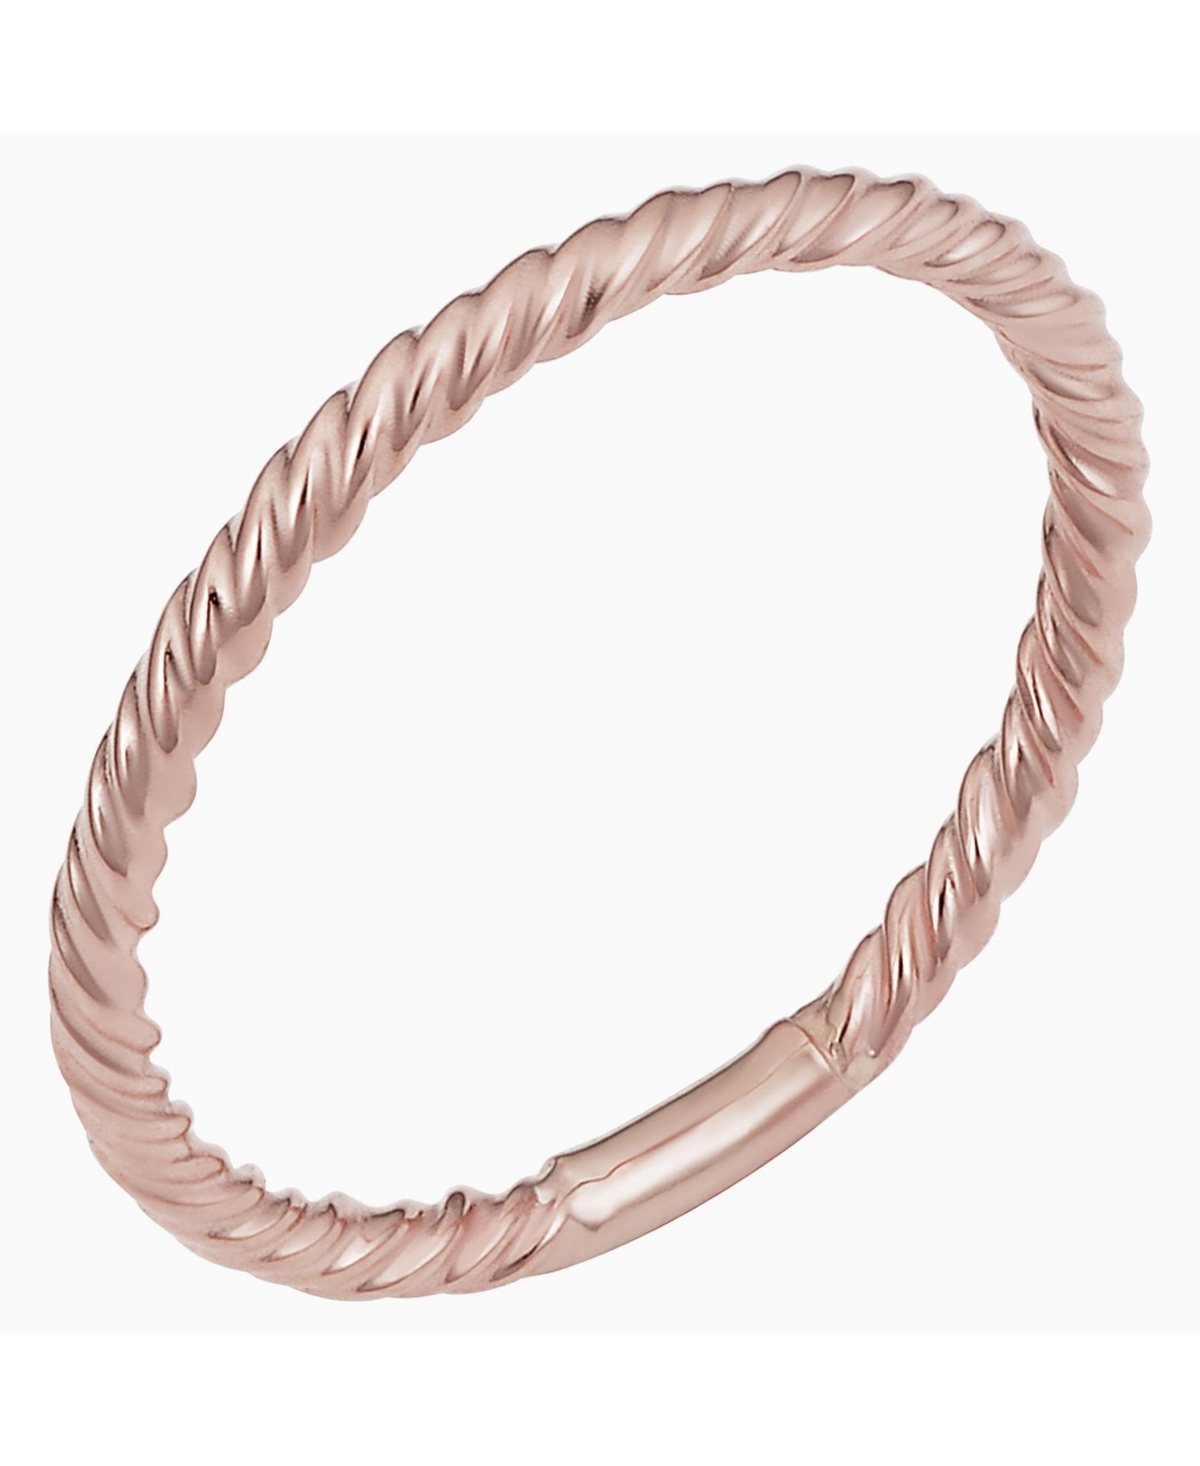 ORADINA DAWN RING IN 14K YELLOW GOLD, 14K WHITE GOLD OR 14K ROSE GOLD- 7 INCHES